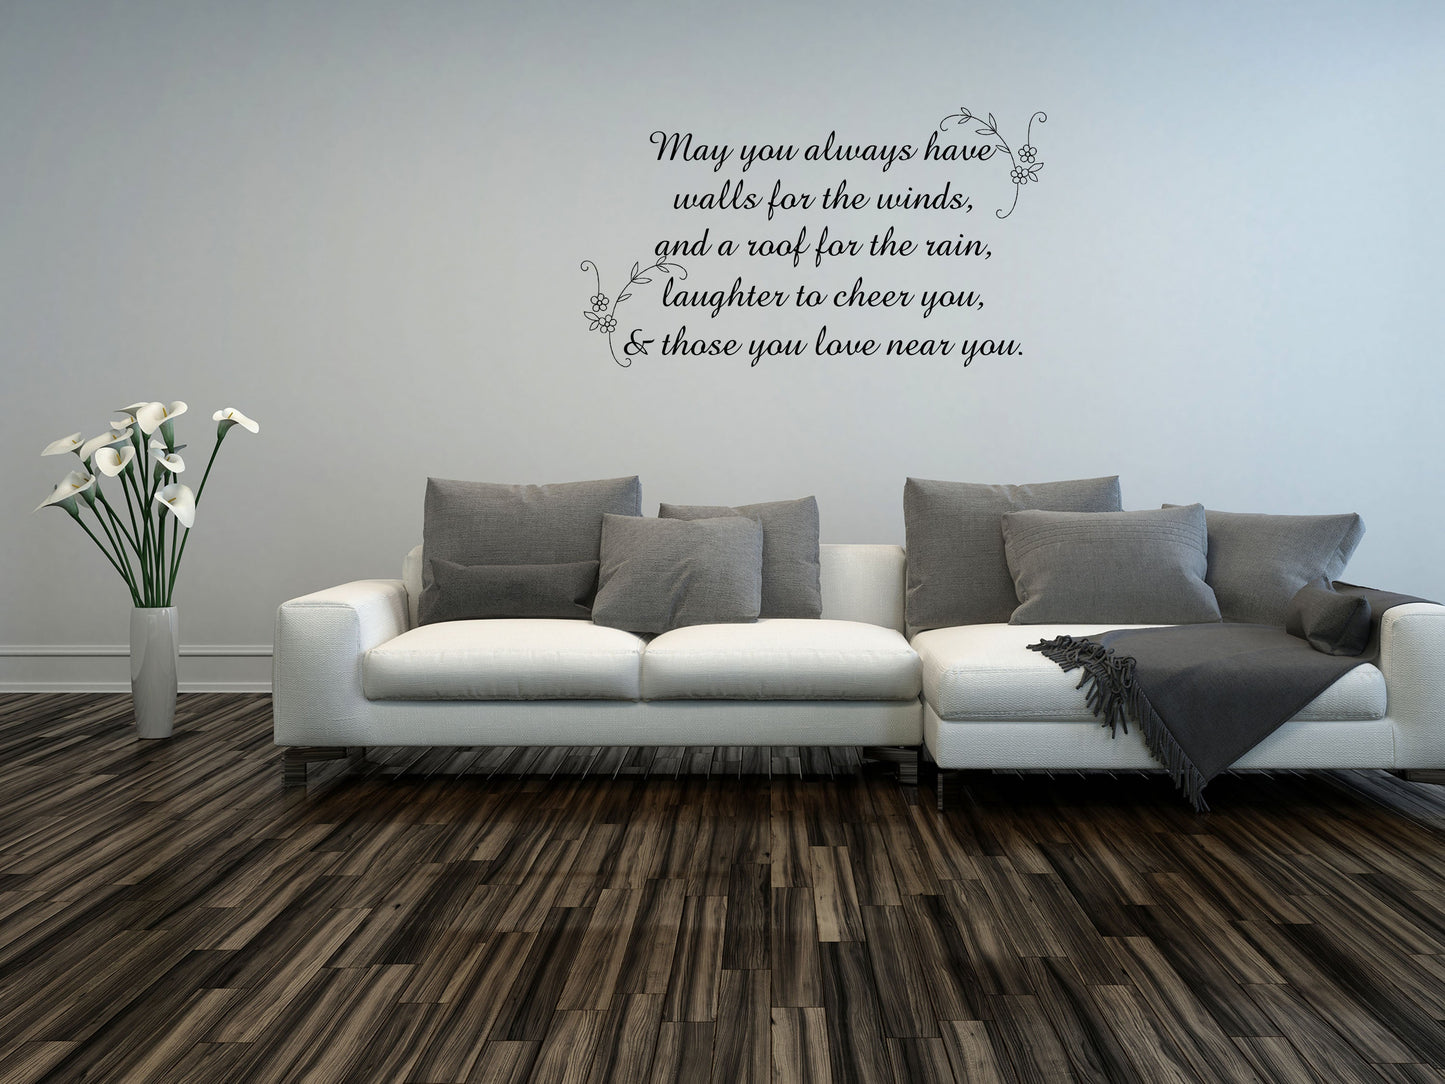 Irish Blessing Wall Word Inspirational Wall Decals Vinyl Wall Decal Done 